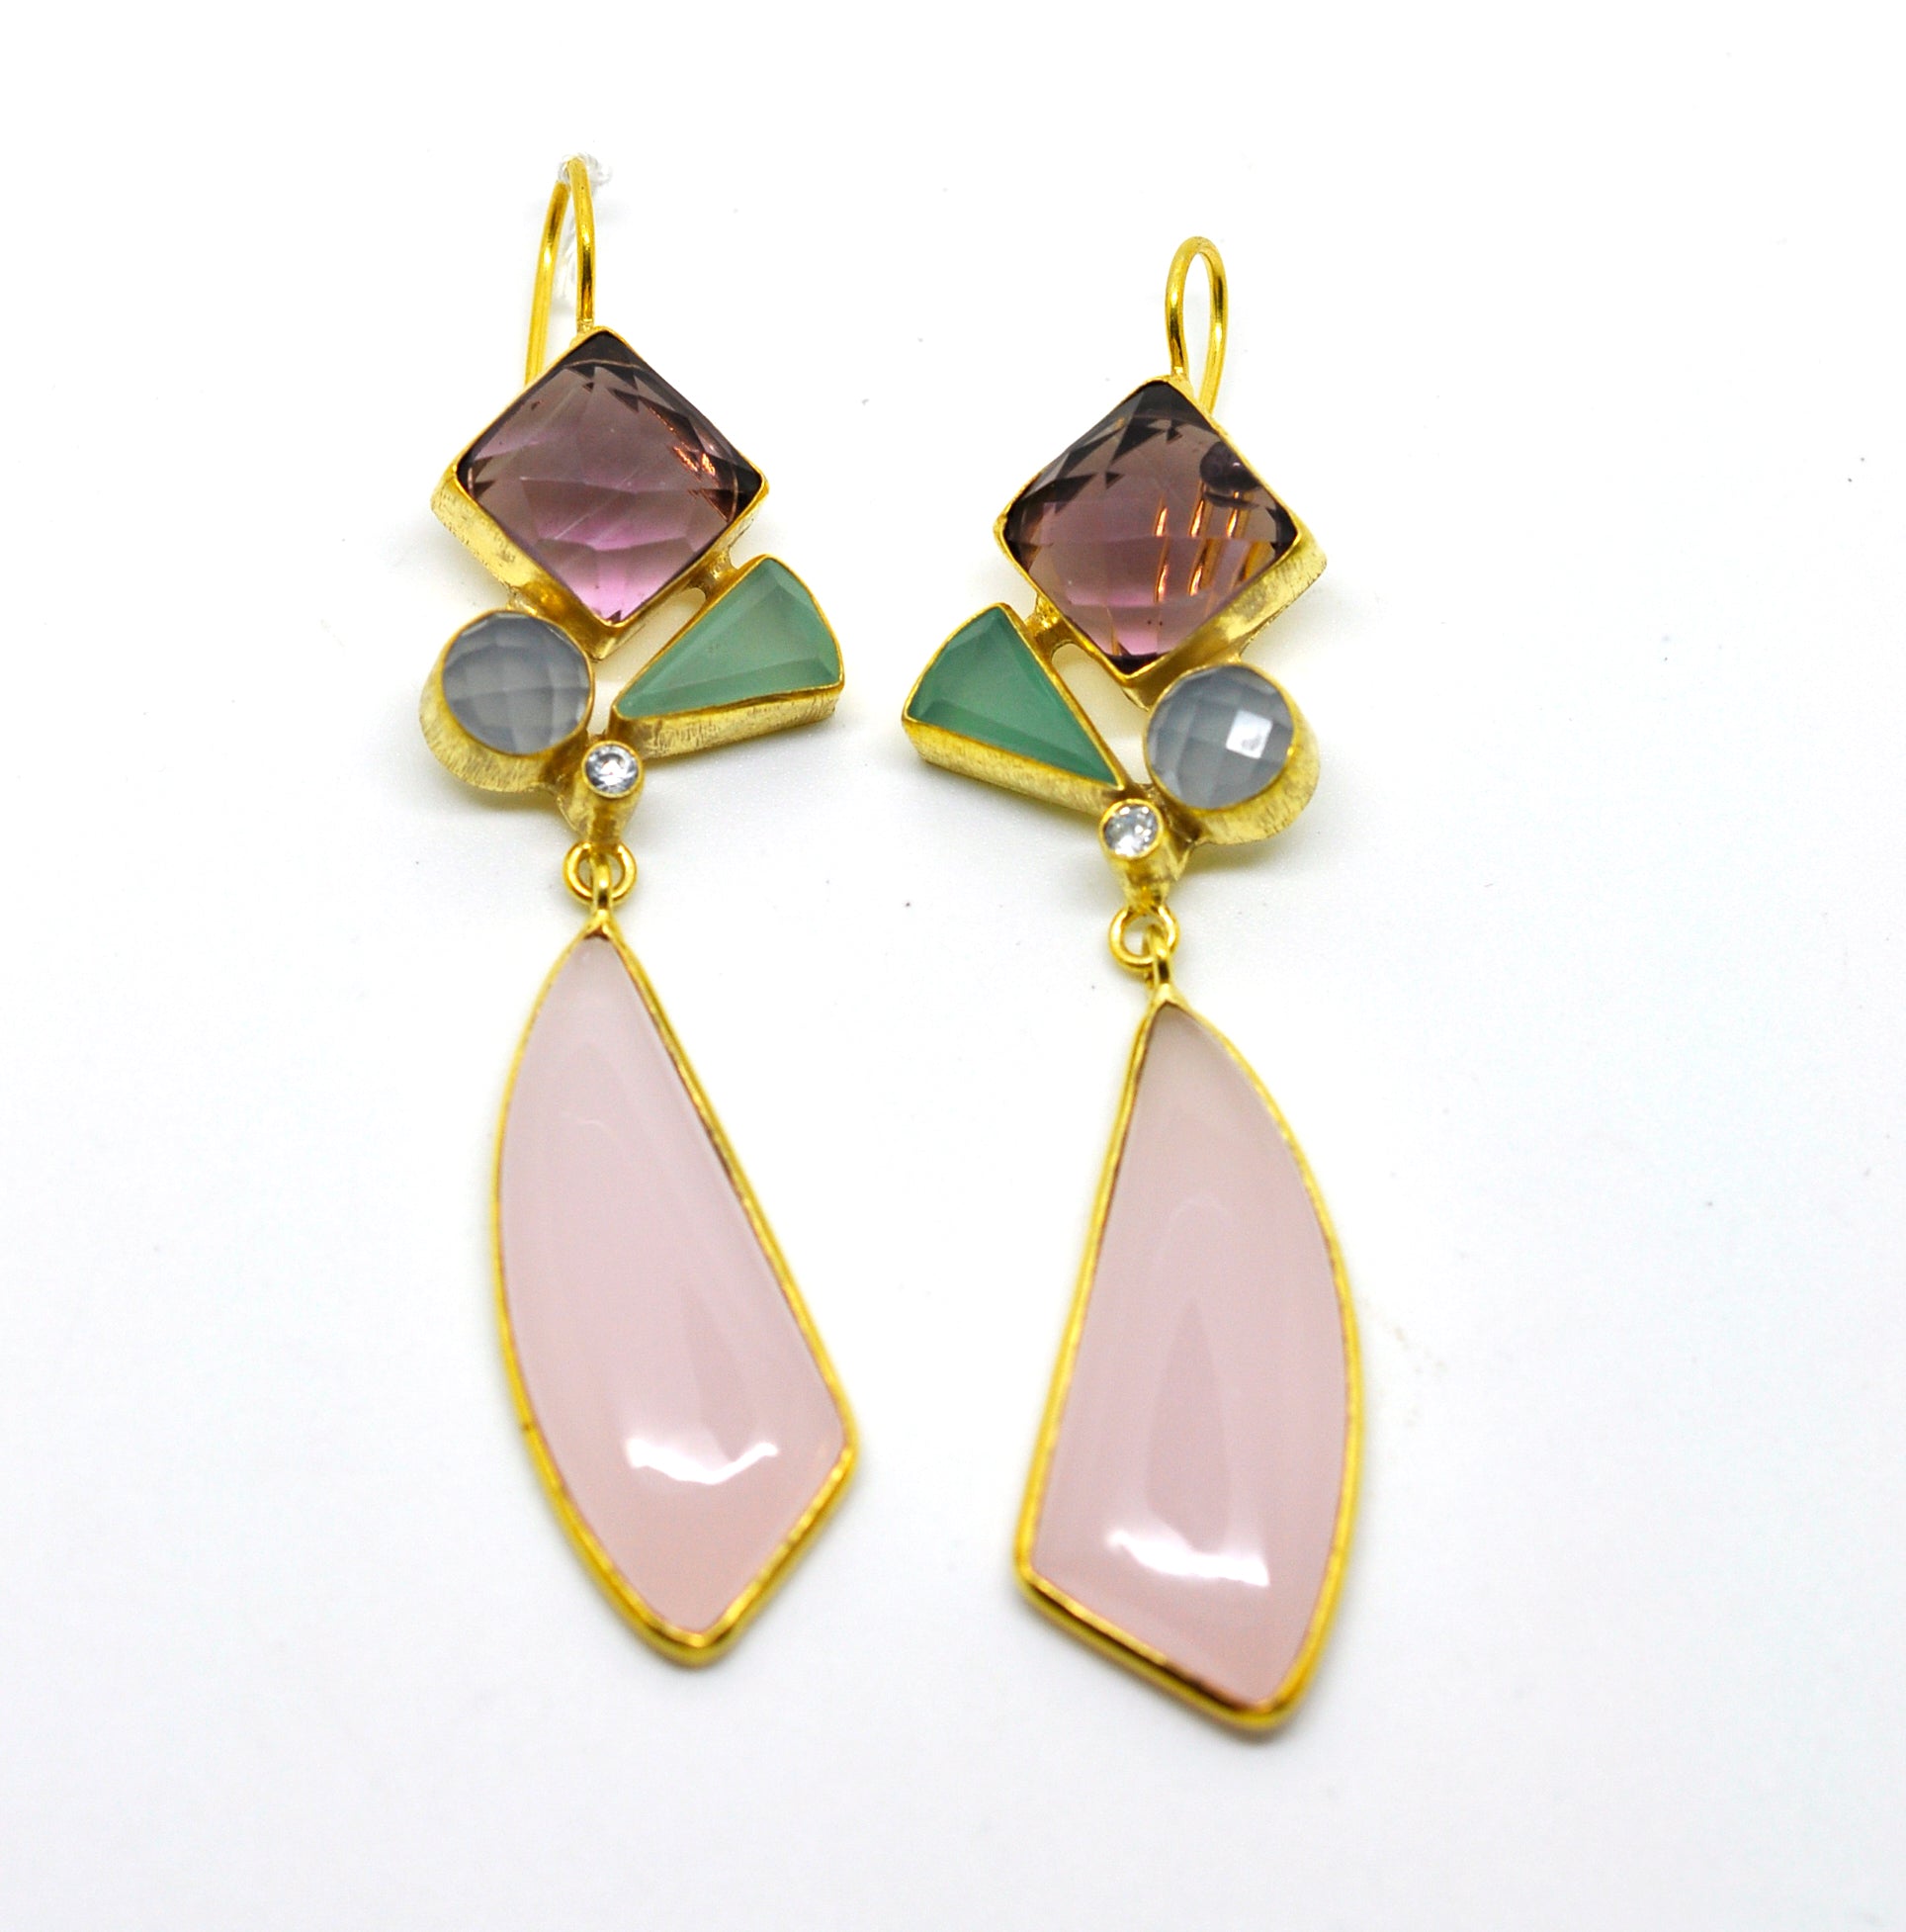 SOLD - 20 in 2020 - Mixed gemstone earring 9